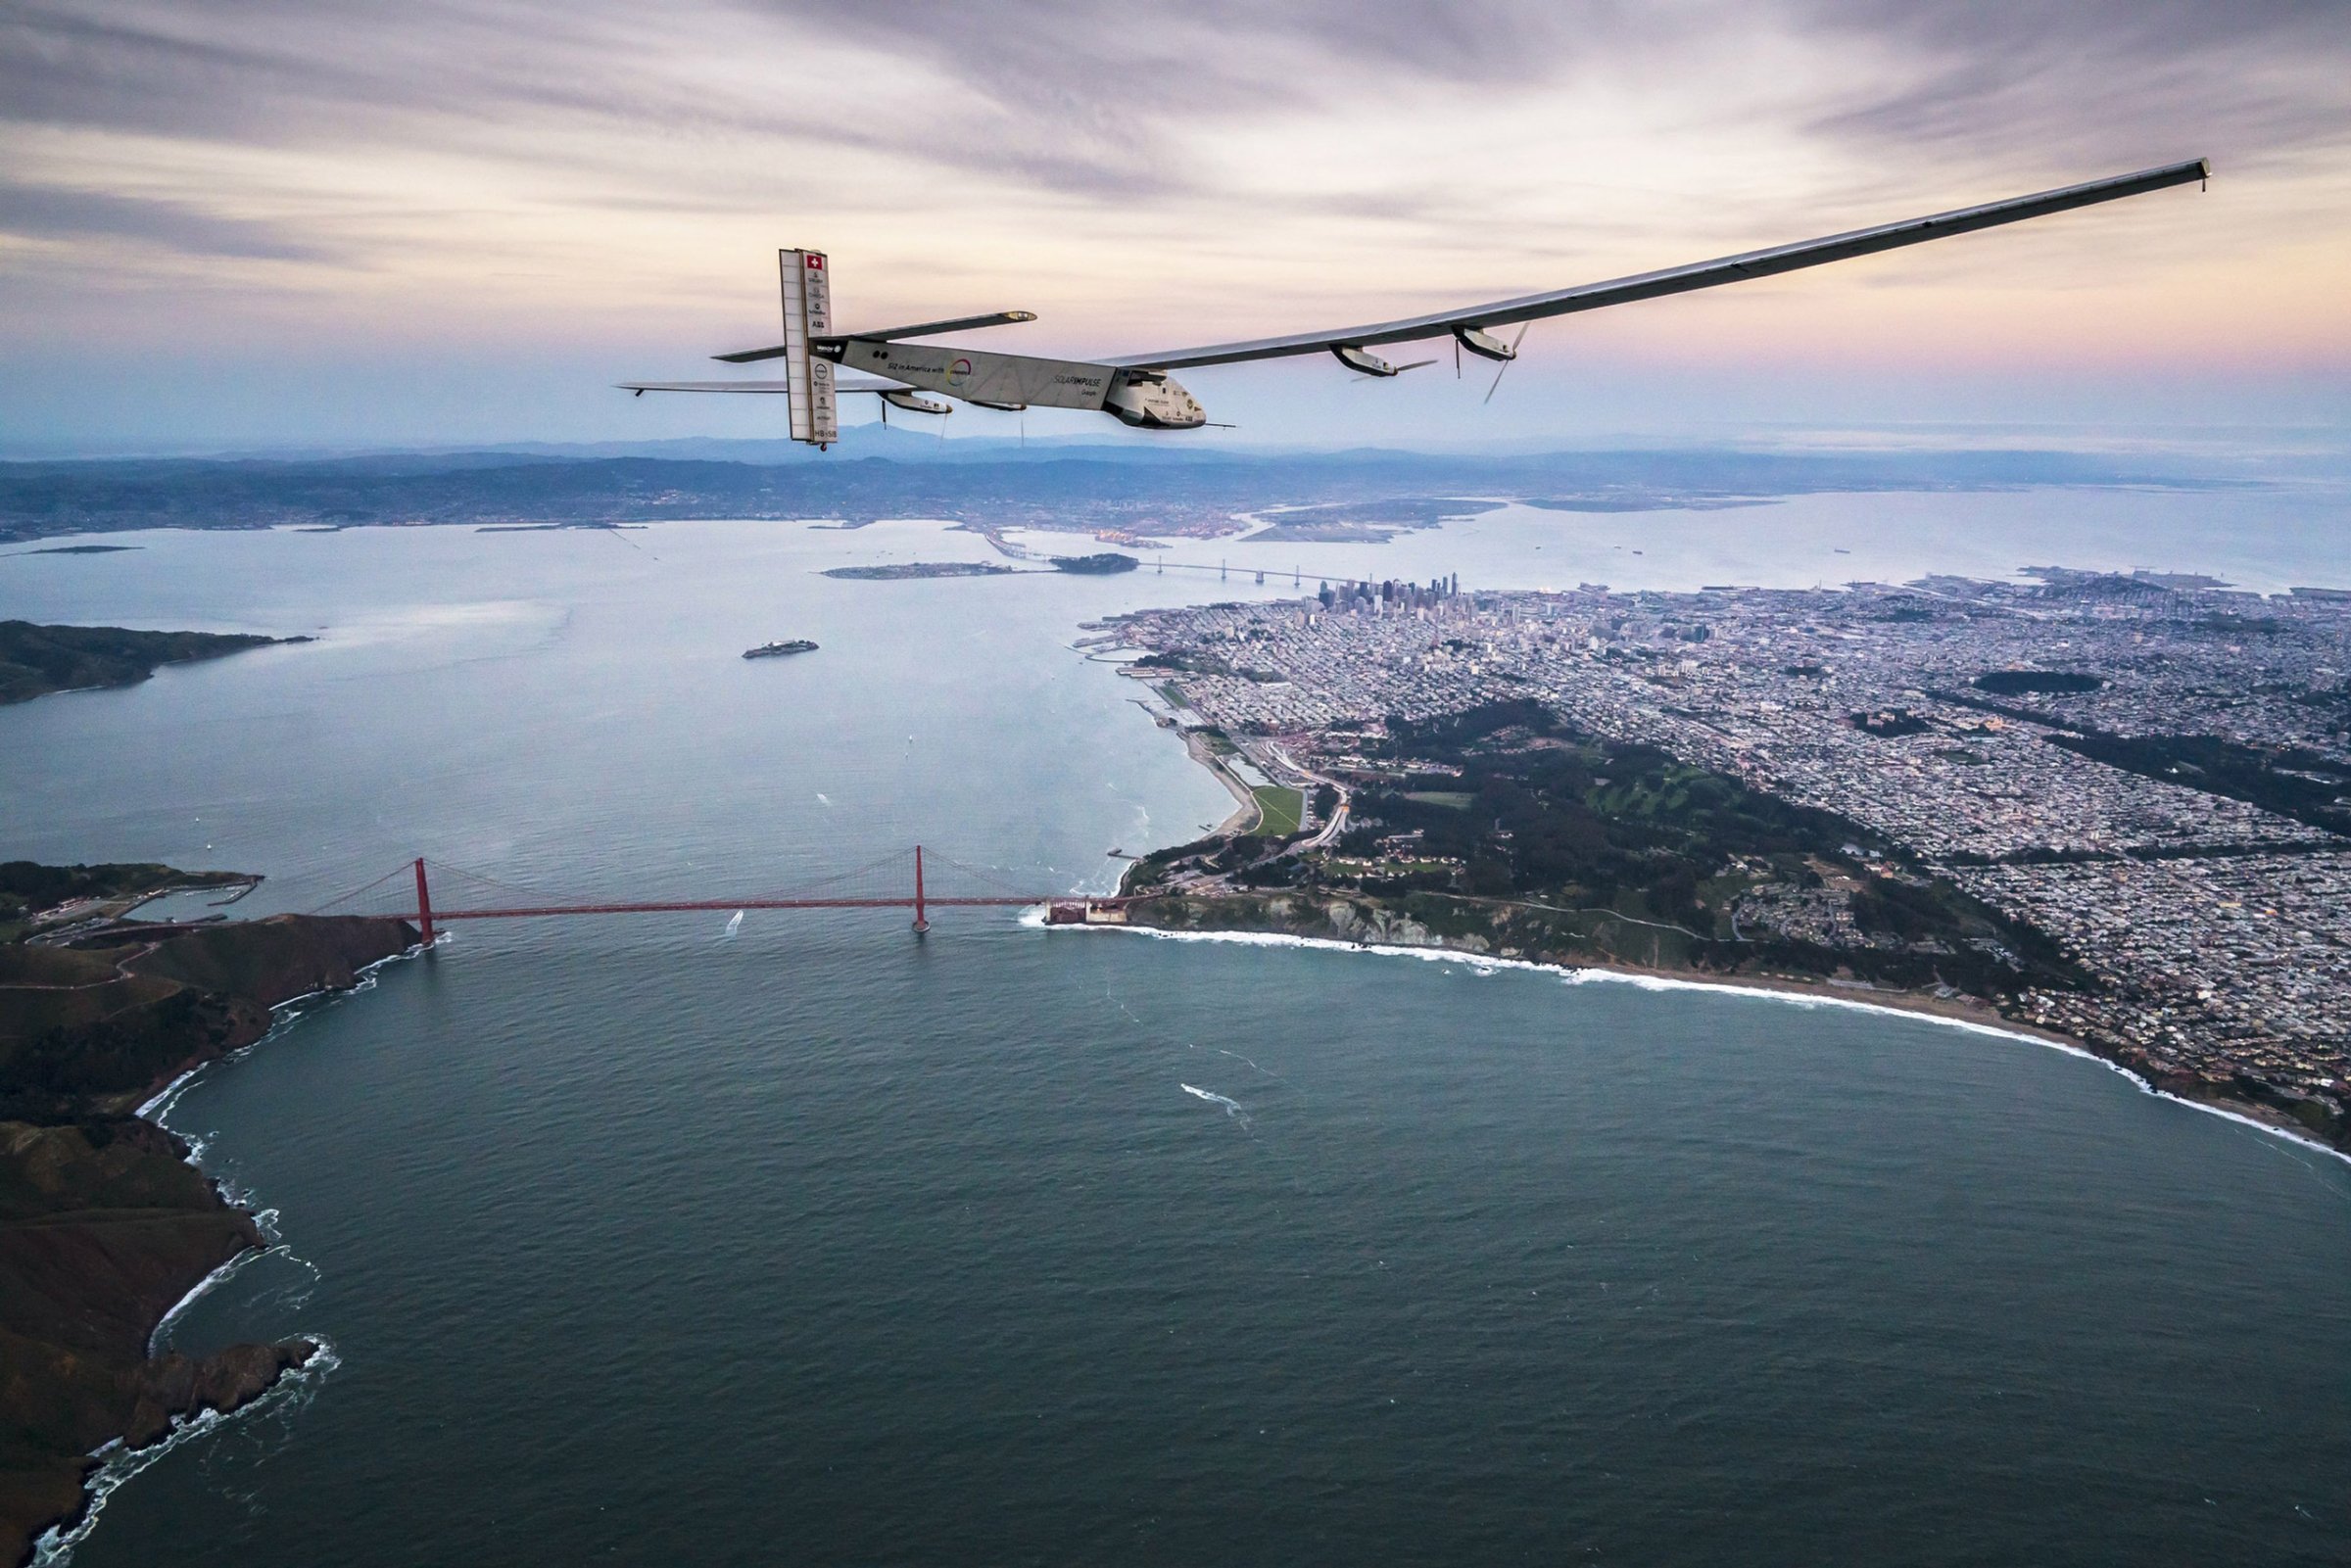 SAN FRANCISCO, CA - APRIL 23: In this handout image supplied by Jean Revillard, Solar powered plane 'Solar Impulse 2', piloted by Swiss adventurer Bertrand Piccard, flys over the Golden Gate bridge in San Francisco, after a flight from Hawaii during its circumnavigation, before landing at Moffett Airfield in Mountain View in Silicon Valley, on April 23, 2016 in San Francisco, California. The Solar Impulse 2 is equipped with 17,000 solar cells, has a wingspan of 72 metres, and yet weighs just over 2 tonnes. (Photo by Jean Revillard via Getty Images)